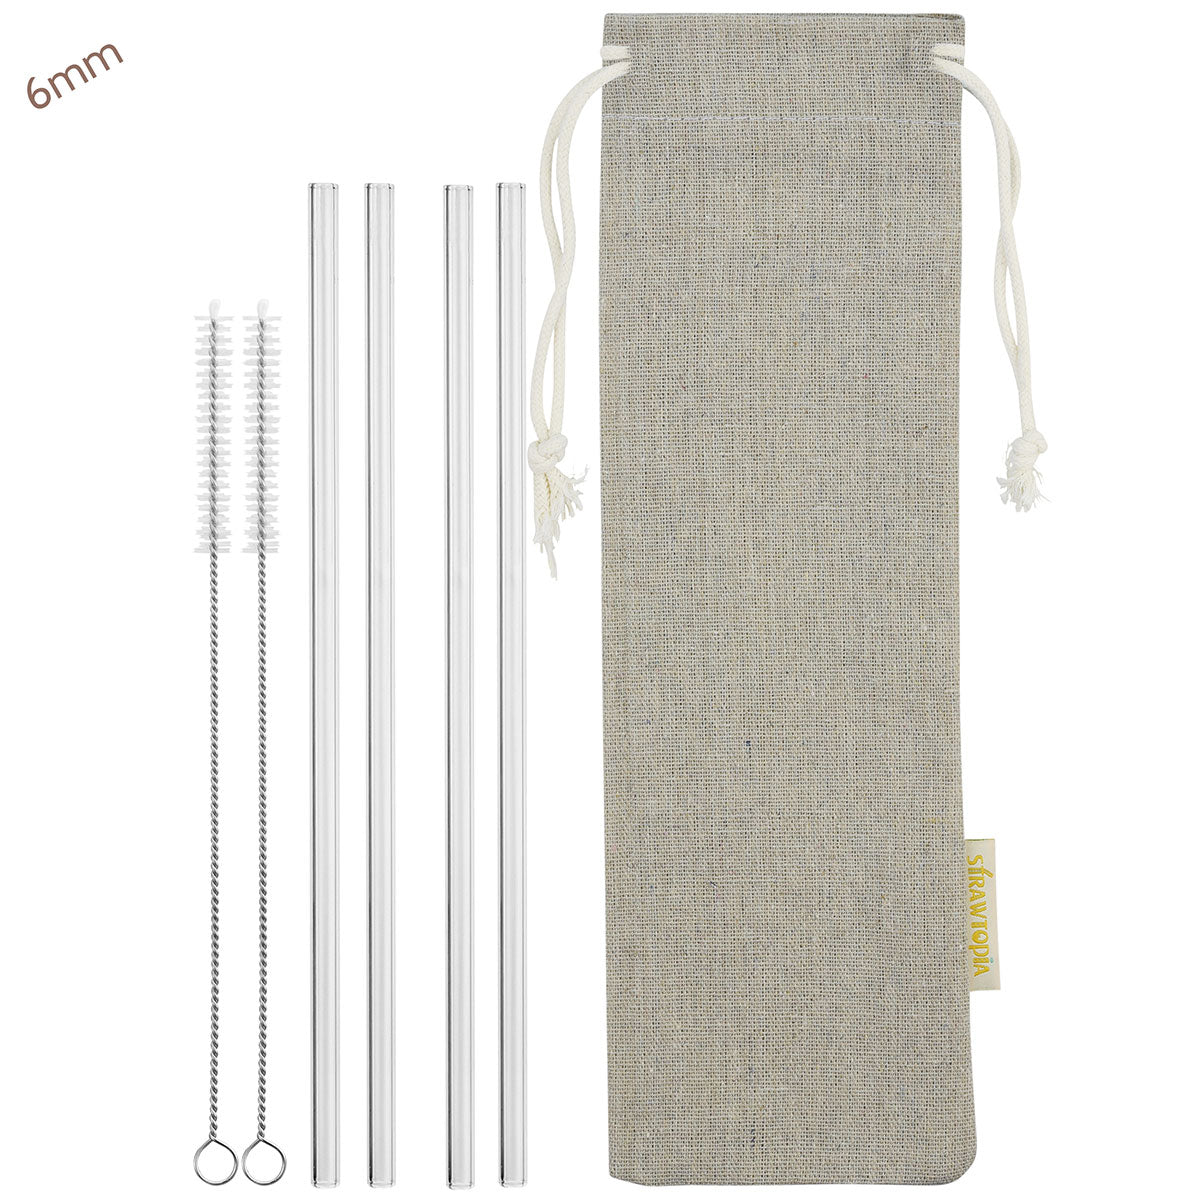 4 Pcs Straight Glass Straws Reusable Clear Straws 12mm Wide